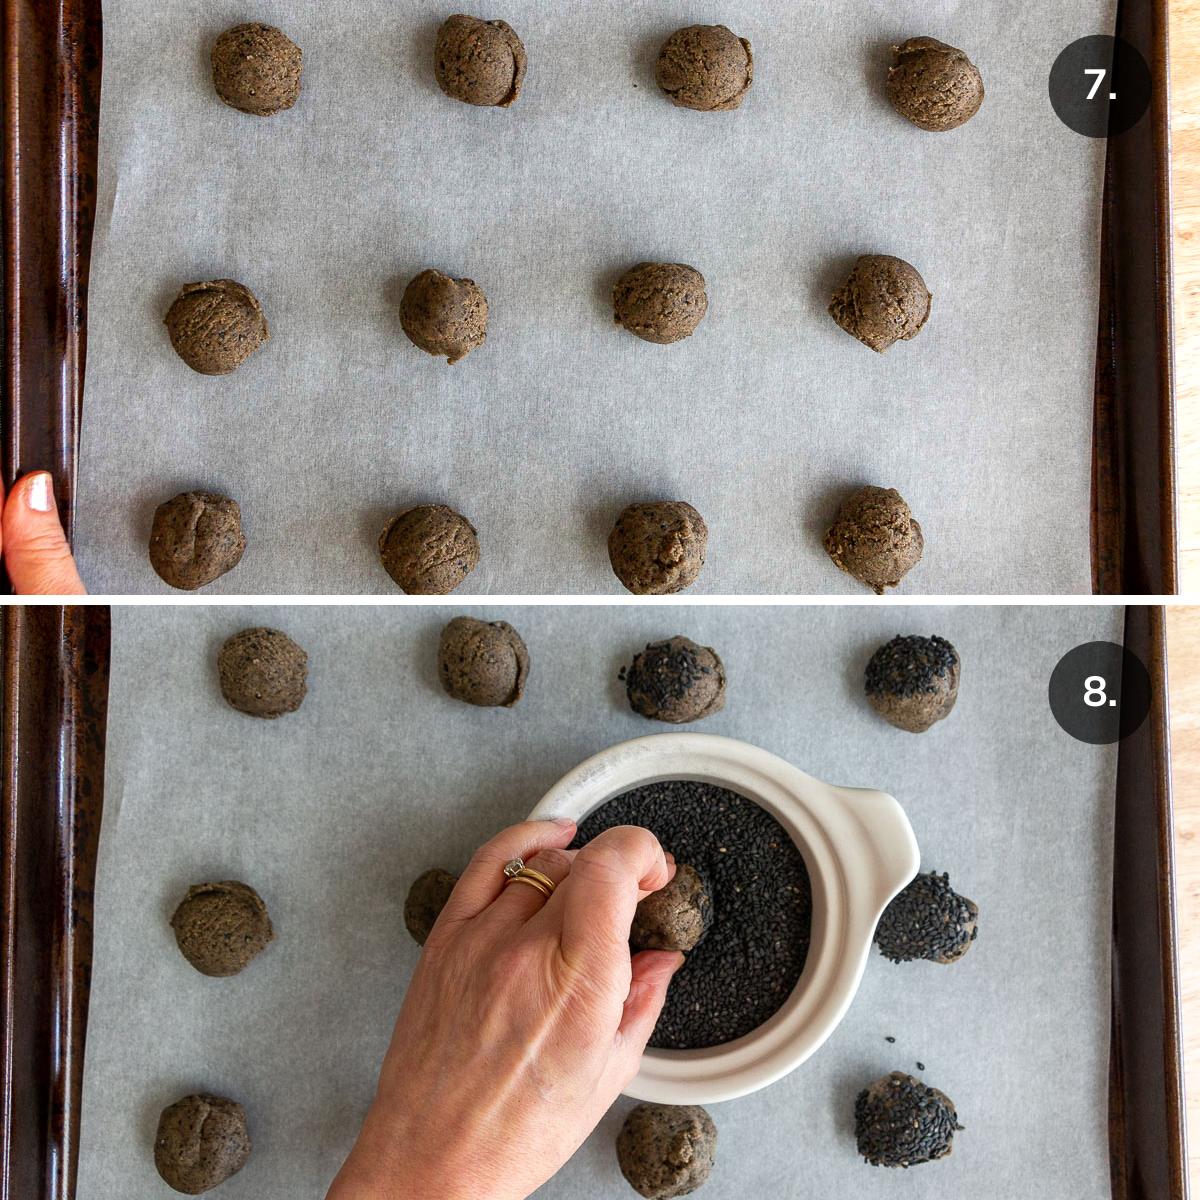 Placed coough dough balls on lined baking sheet and dipping into toasted sesame seeds. 